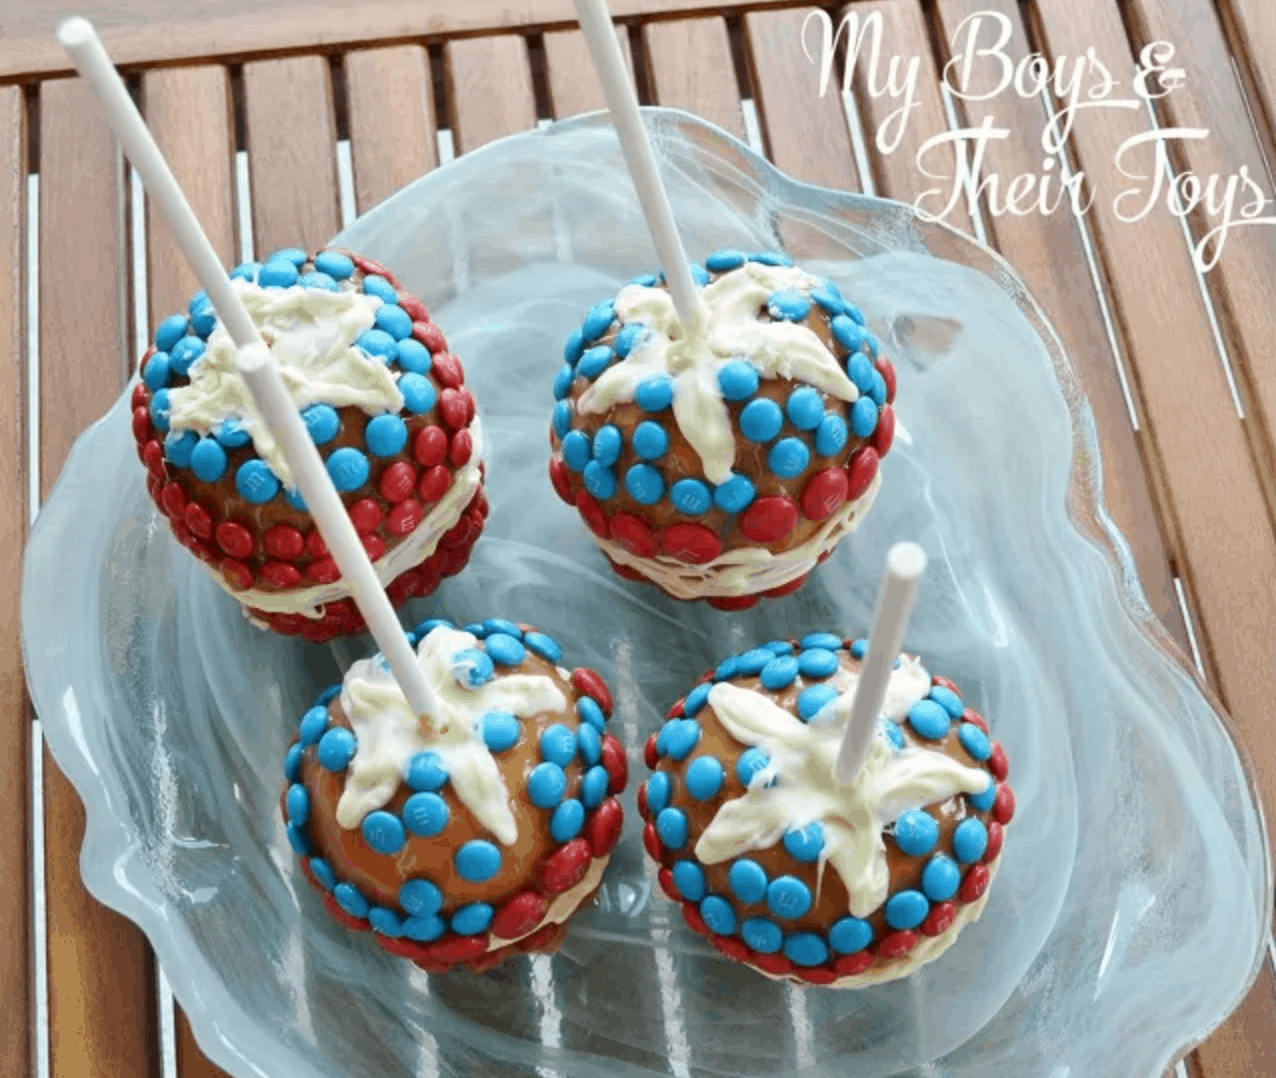 Red, white, and blue candy apples with M & Ms.